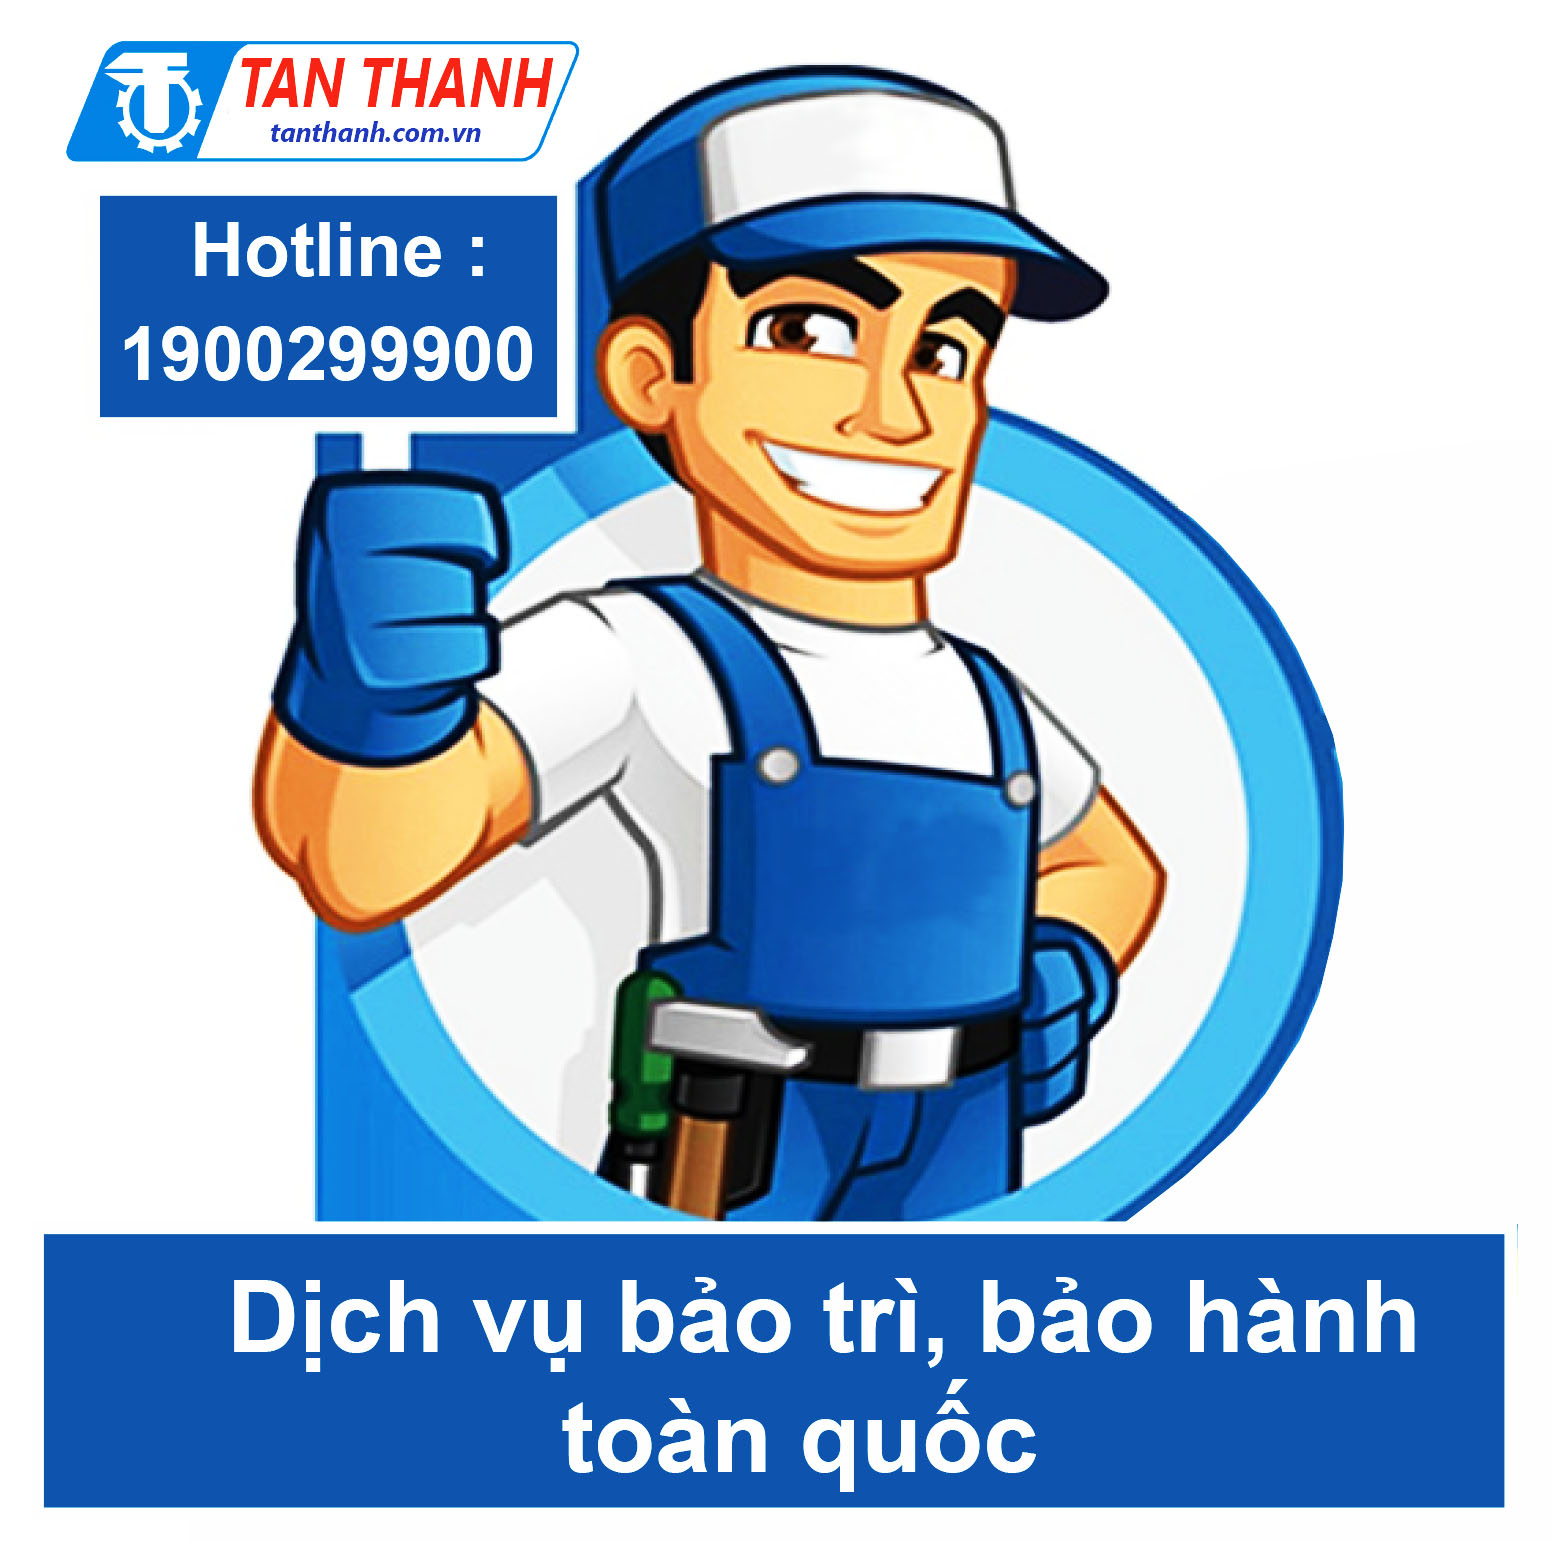 Warranty and maintenance services of Tan Thanh welding machine manufacturer